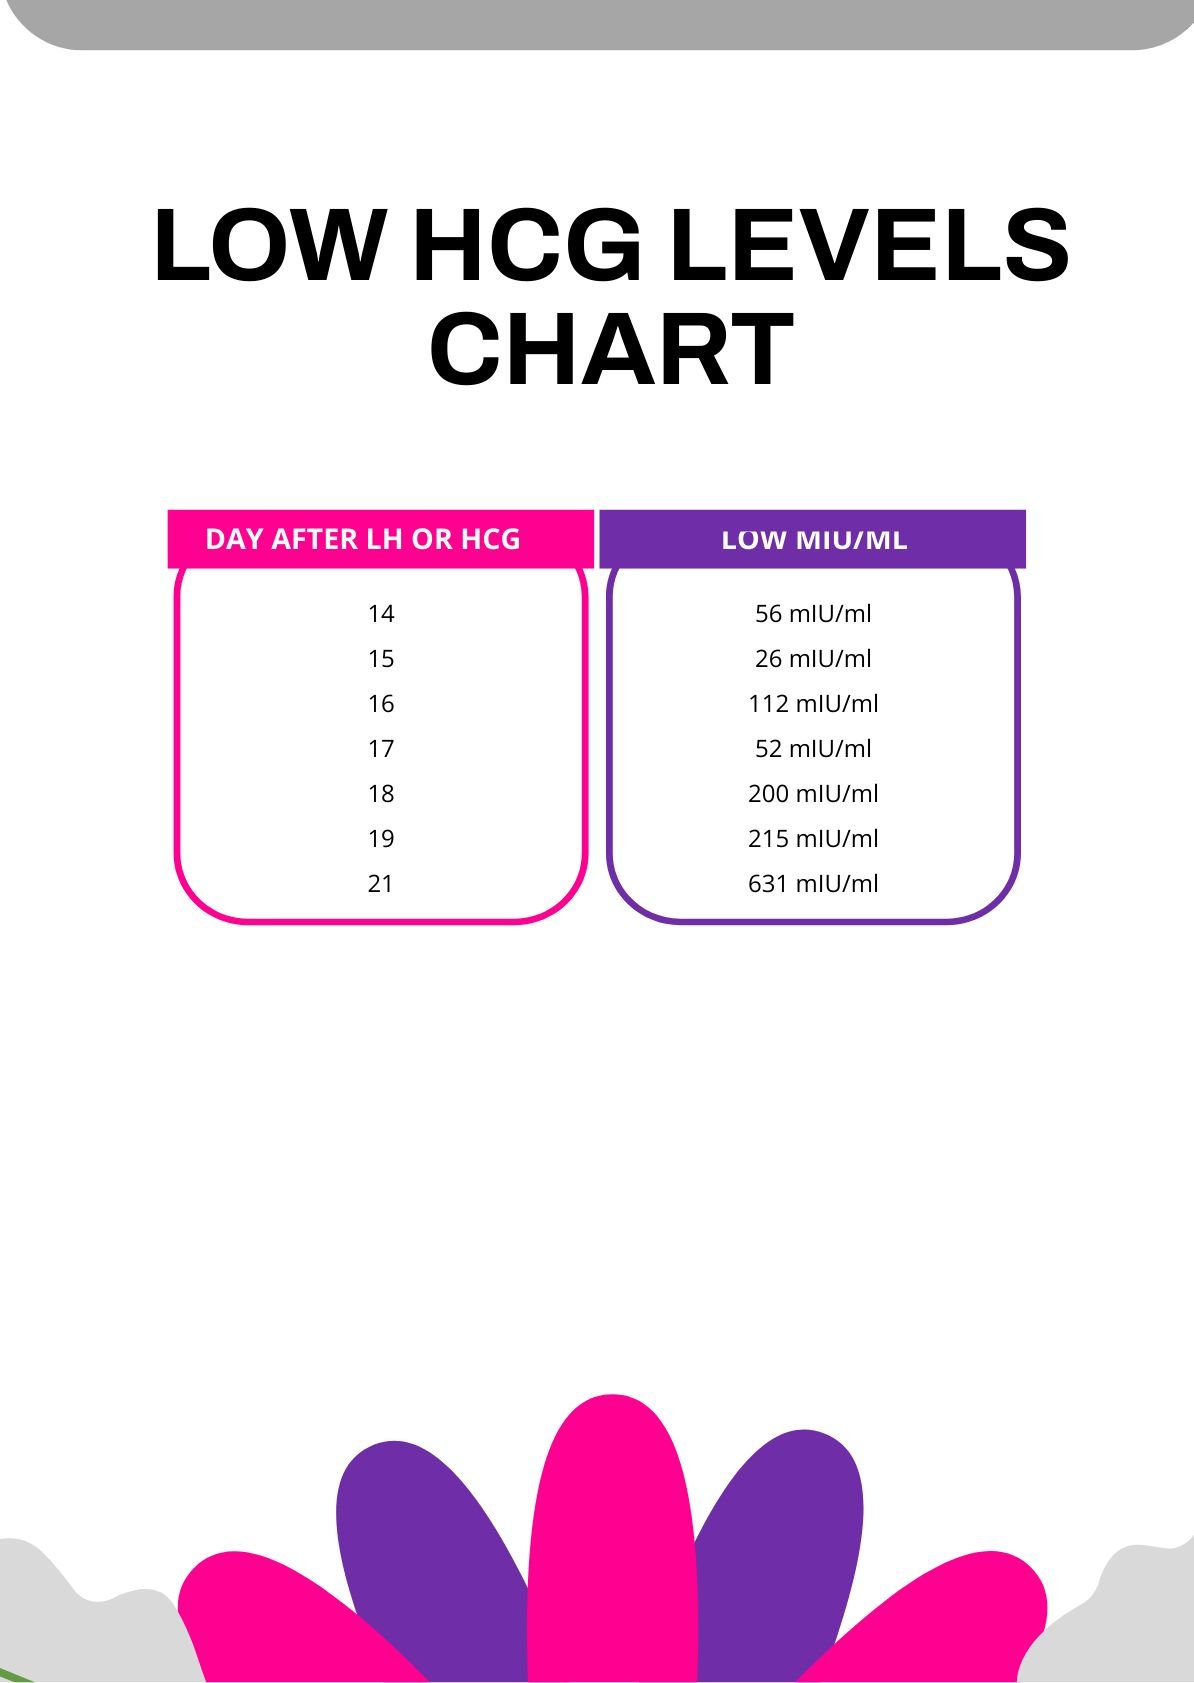 Low HCG Levels Chart in PDF